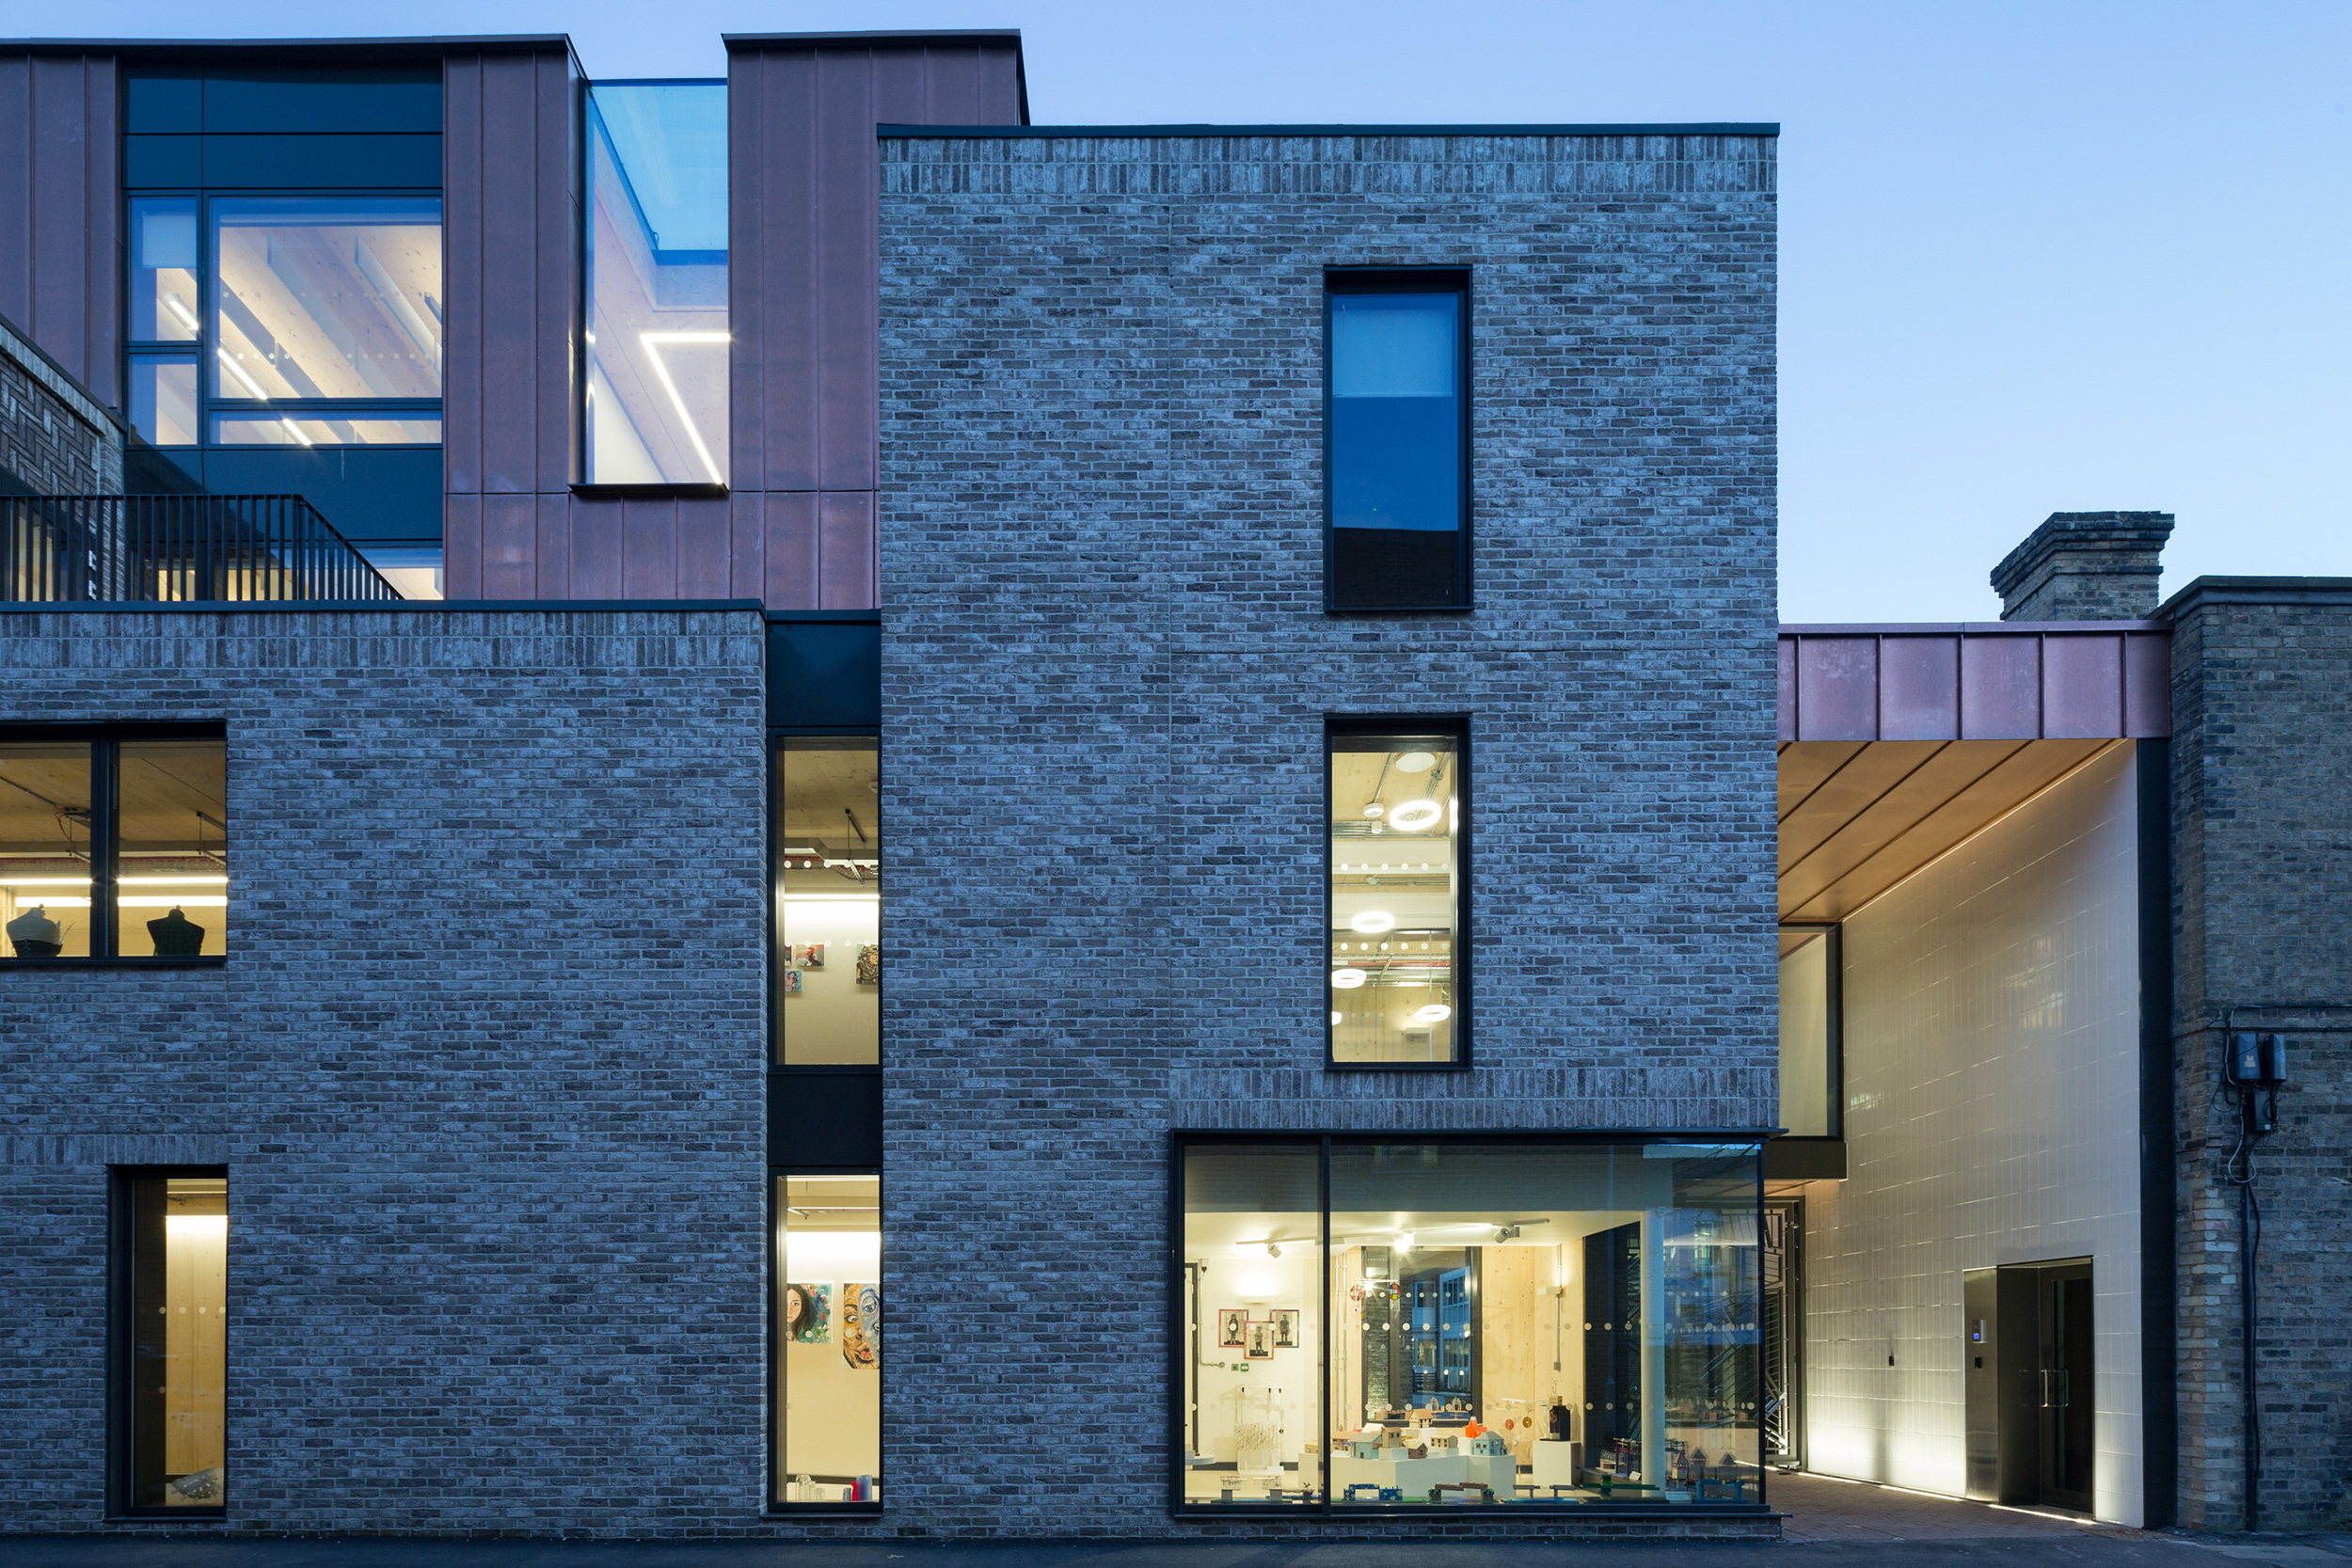 Late evening view of front entrance to cambridge sports learning school by architects CDC studios with lights on